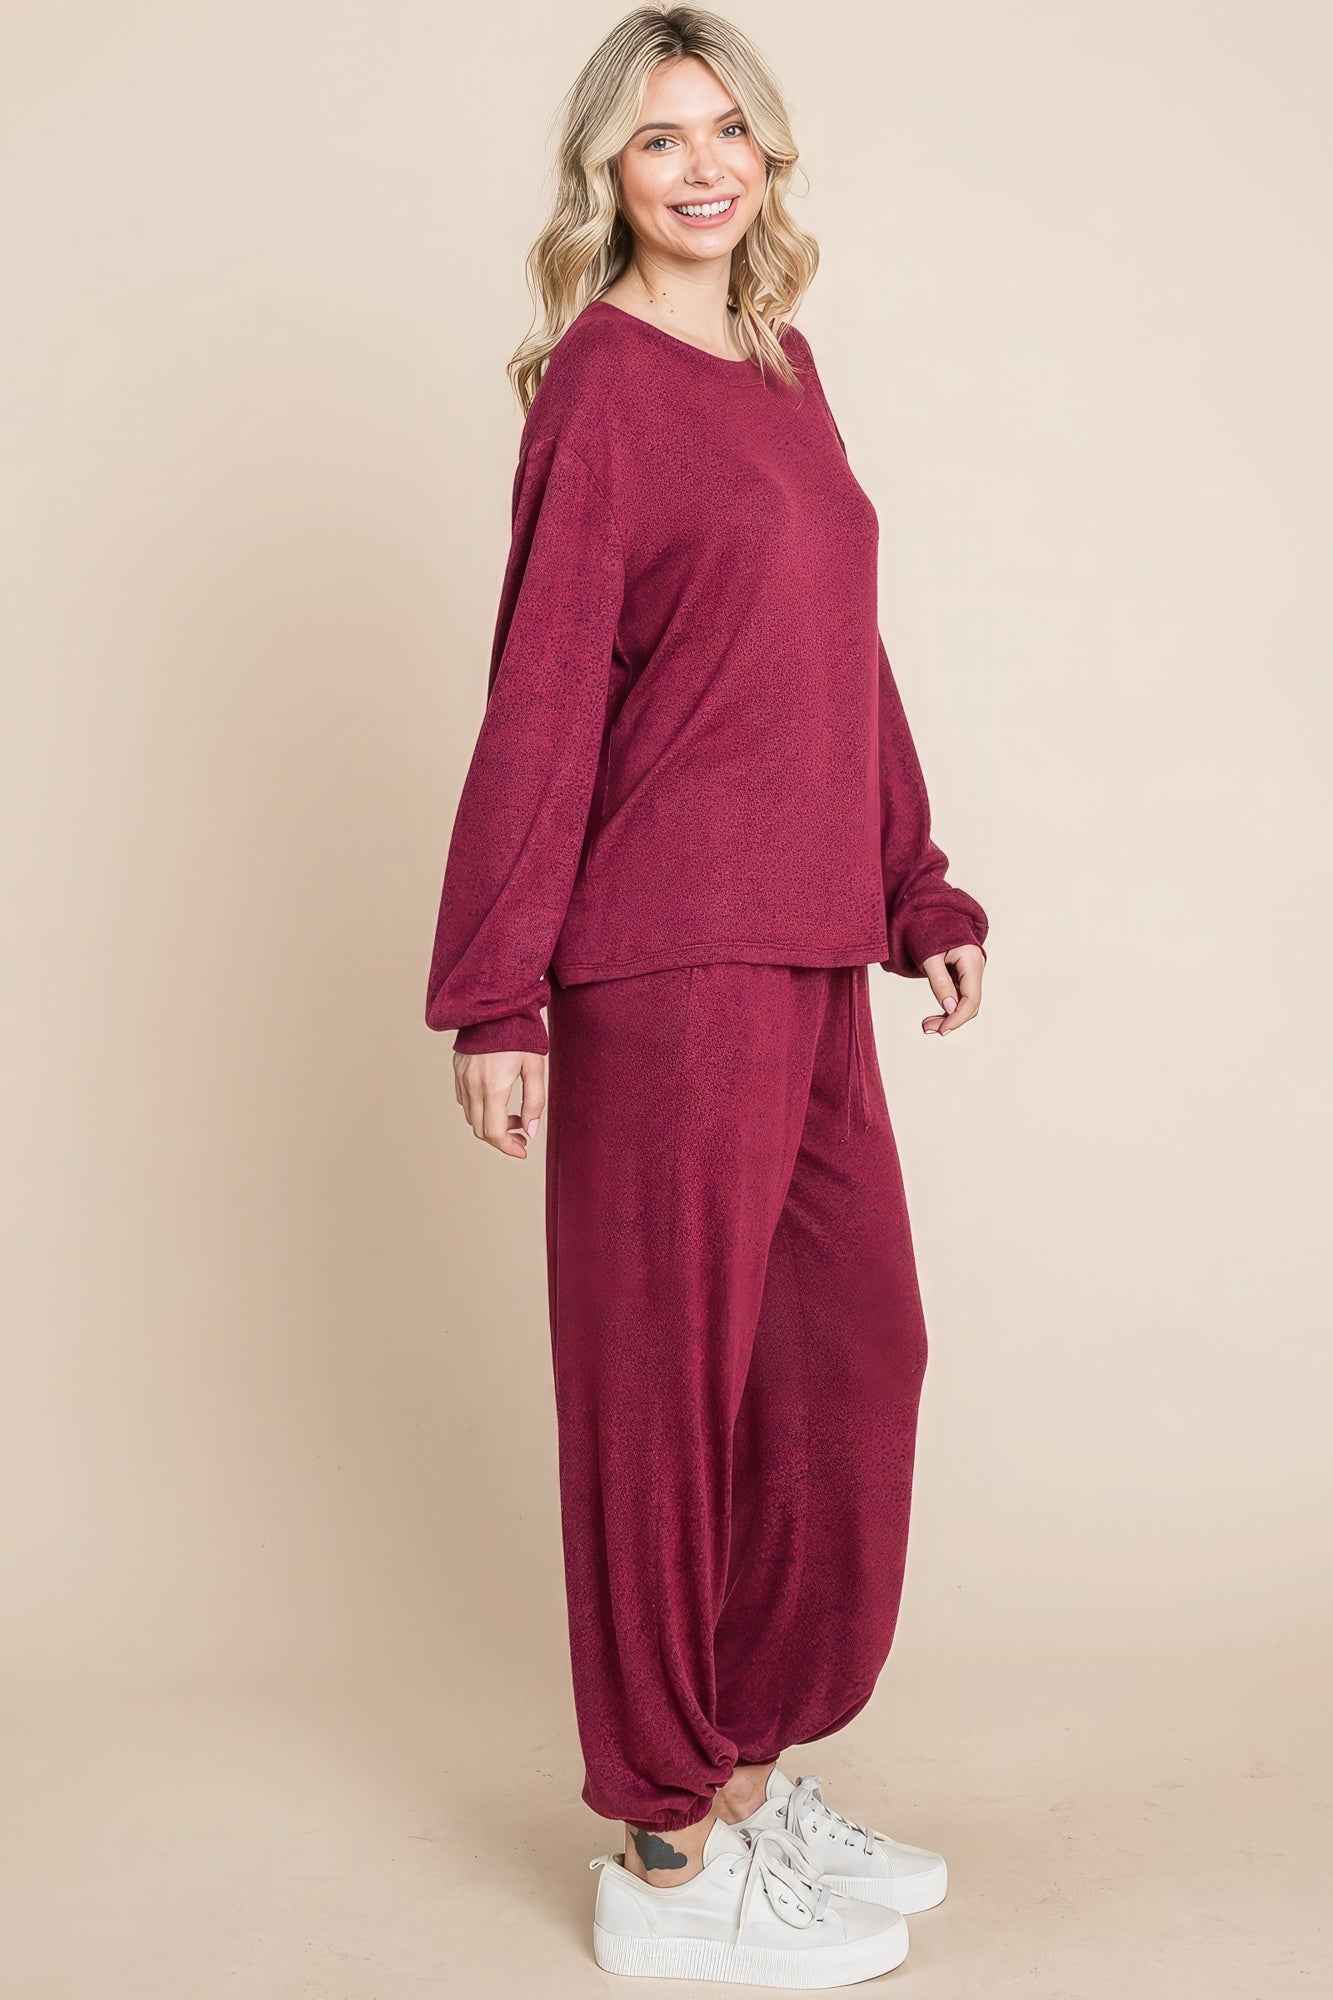 Two Tone Solid Warm And Soft Hacci Brush Loungewear Set | us.meeeshop